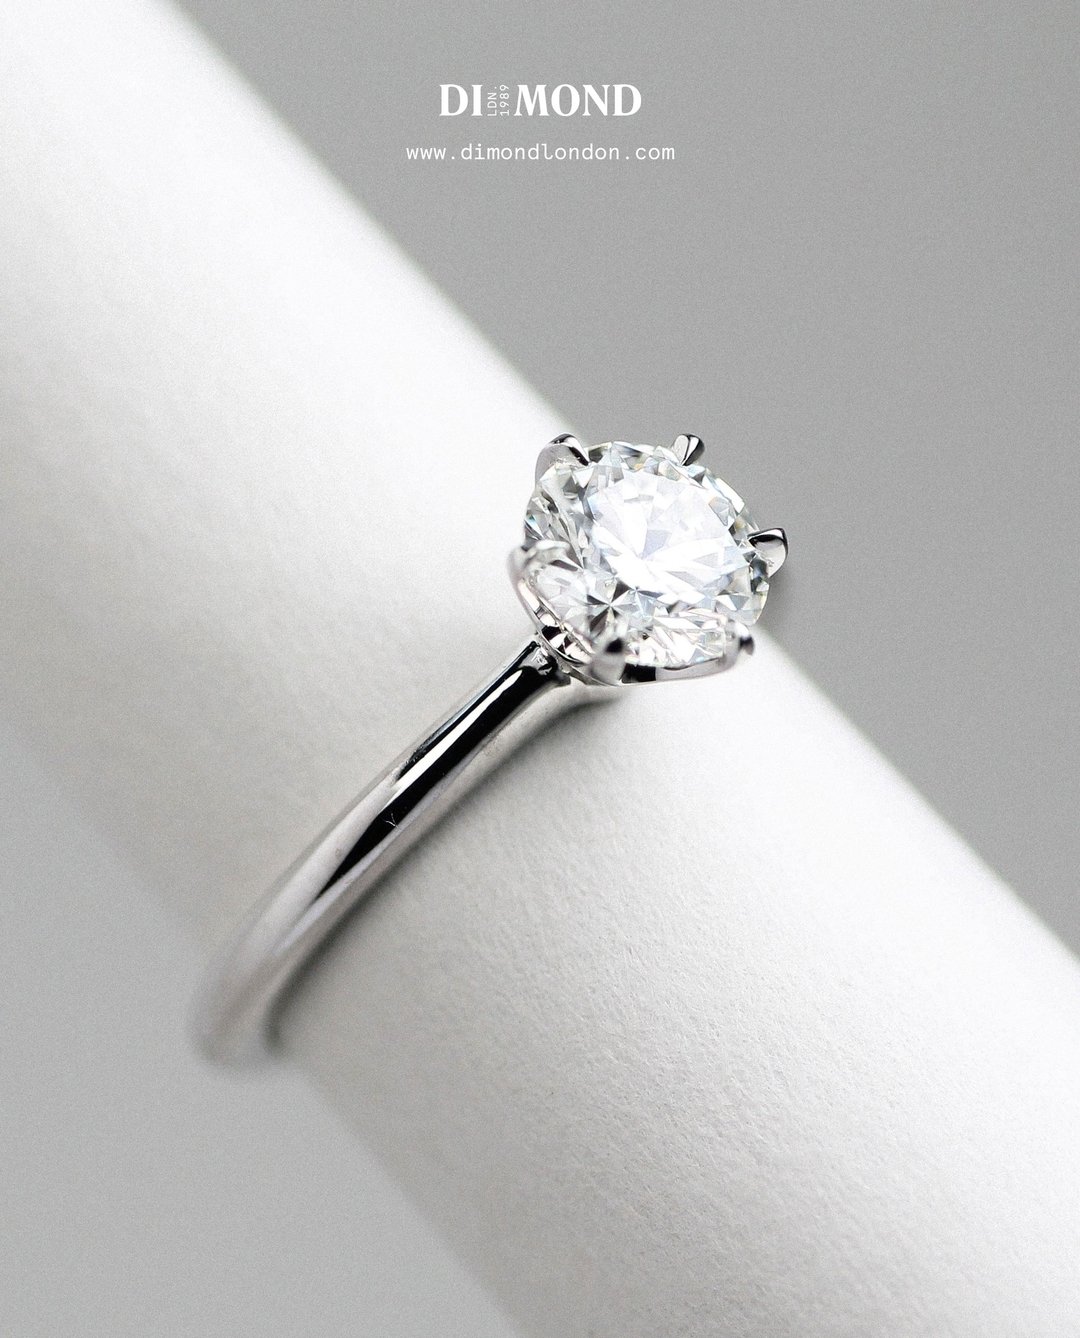 Our diamond expert, Martin, seeks only top percentile diamonds to uphold our family&rsquo;s standards and provide the finest stones to our clients. This platinum solitaire engagement ring features a round brilliant diamond meeting strict criteria for